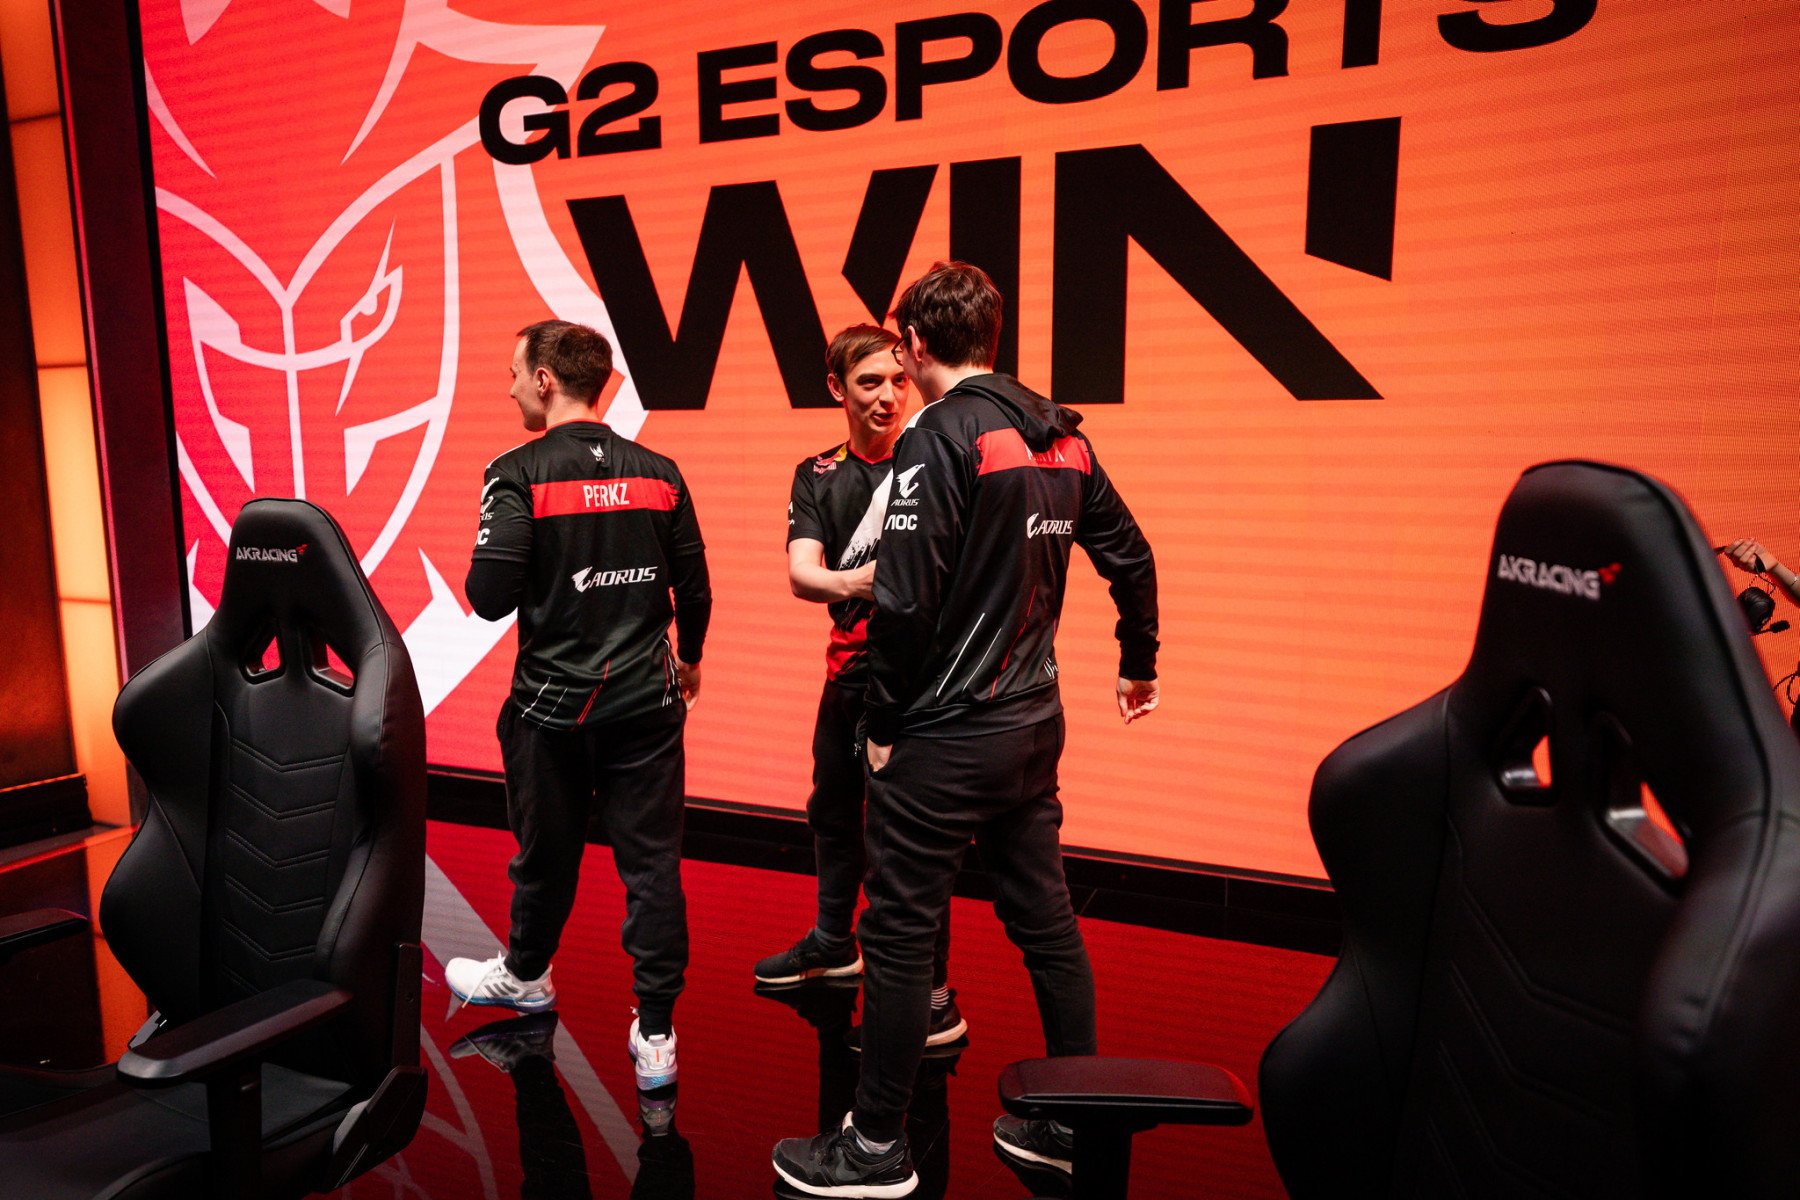 Esports athletes able to enter Germany despite COVID-19 restrictions